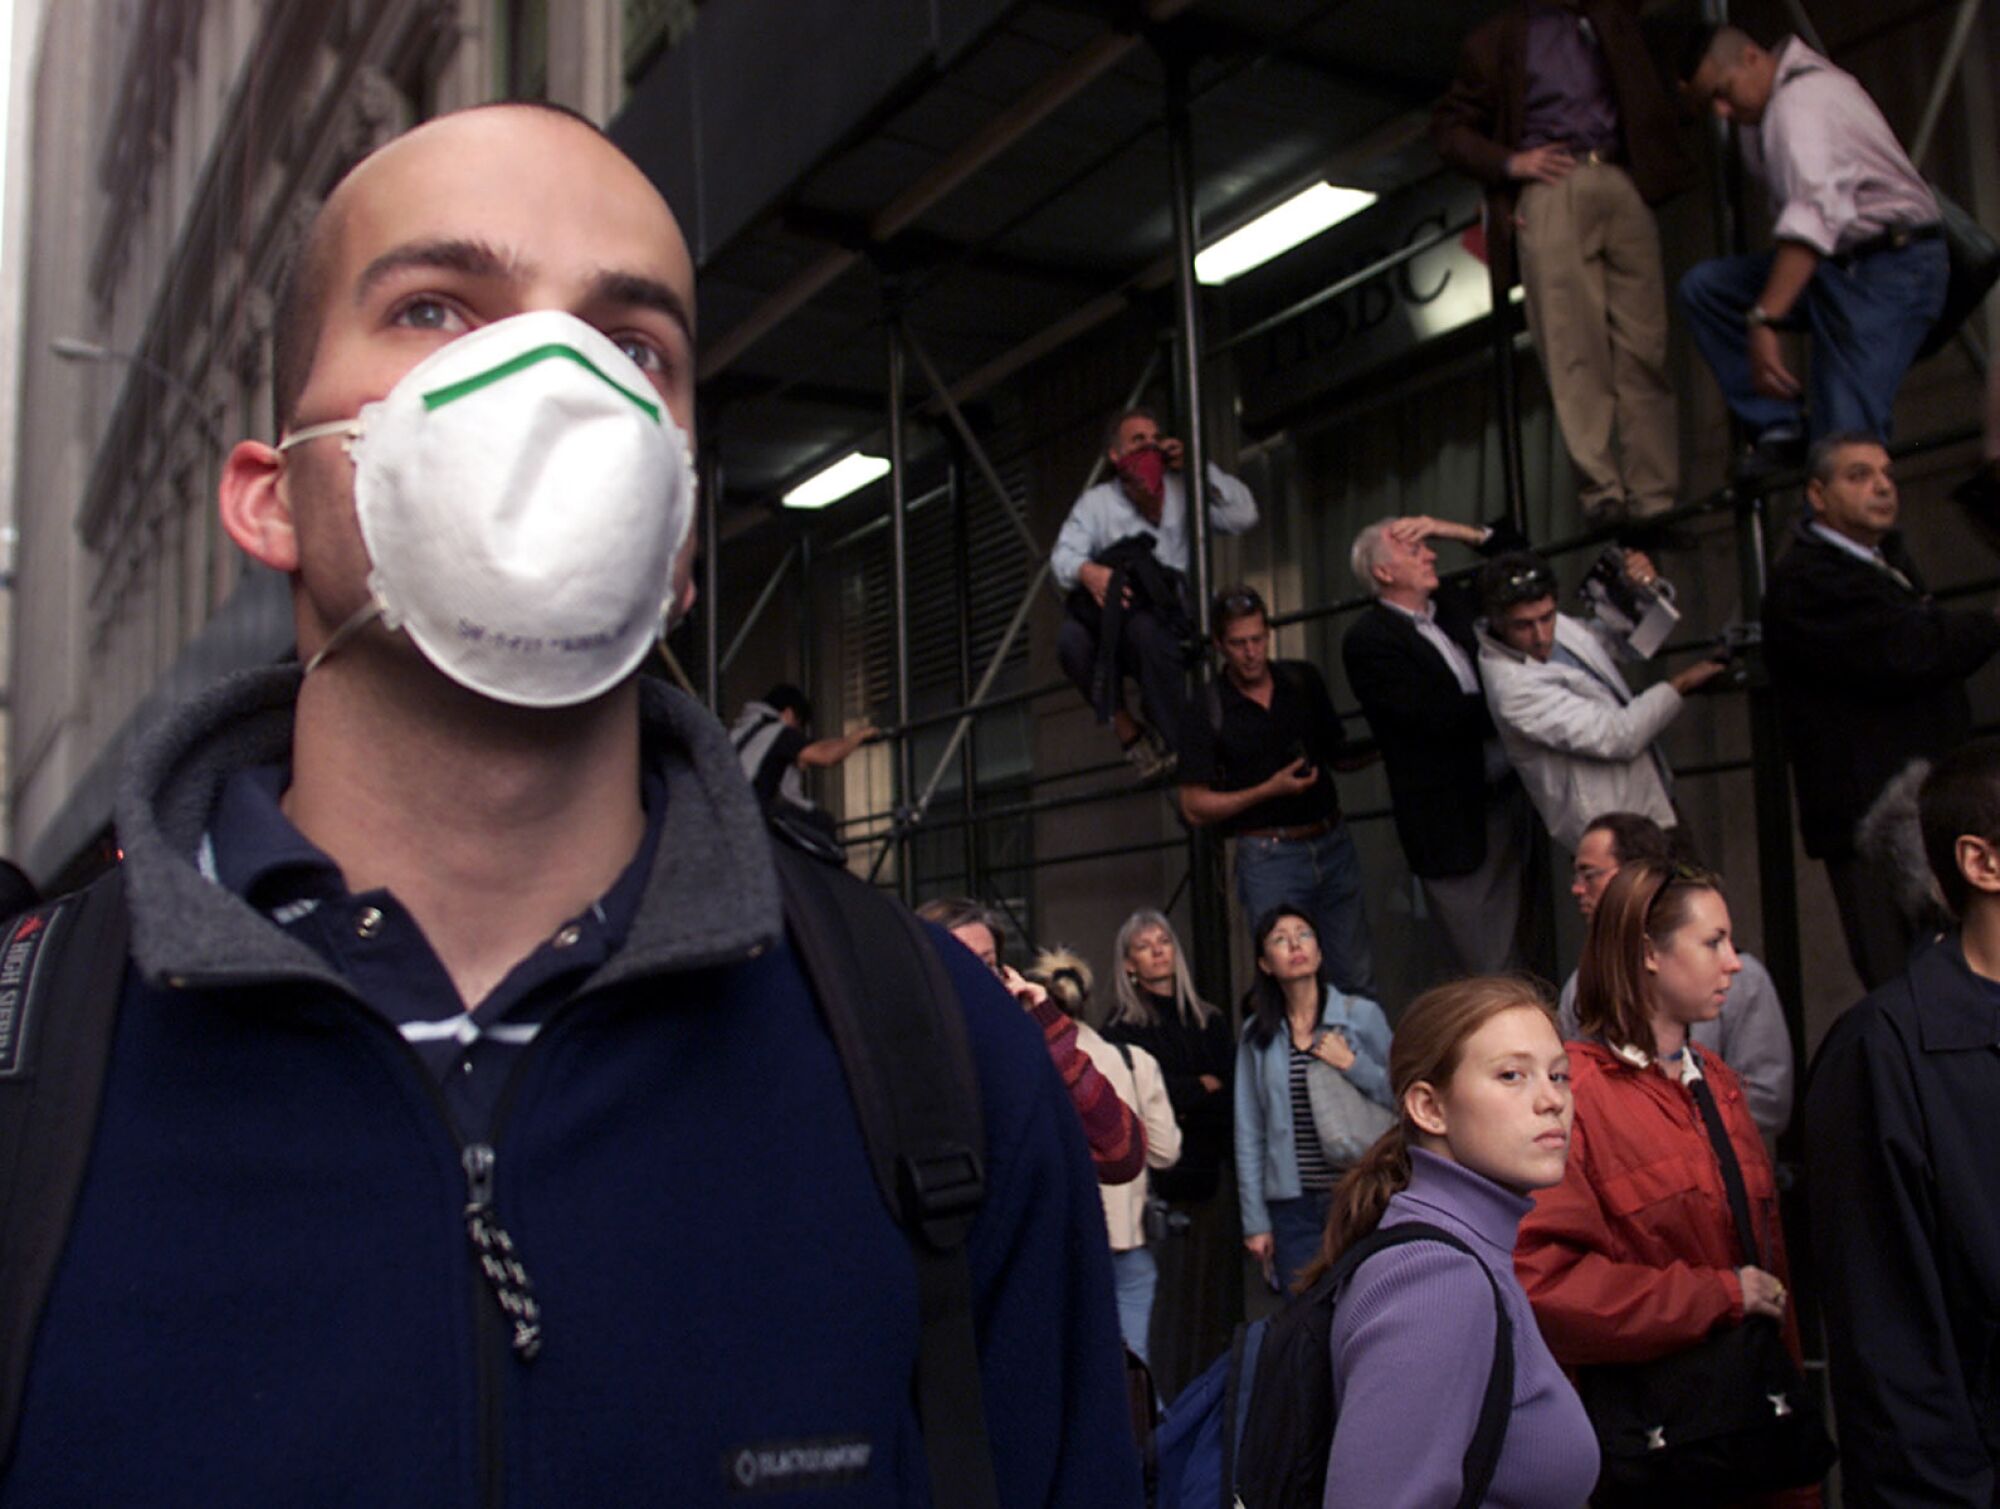 A man in a protective mask stands next to a group of onlookers